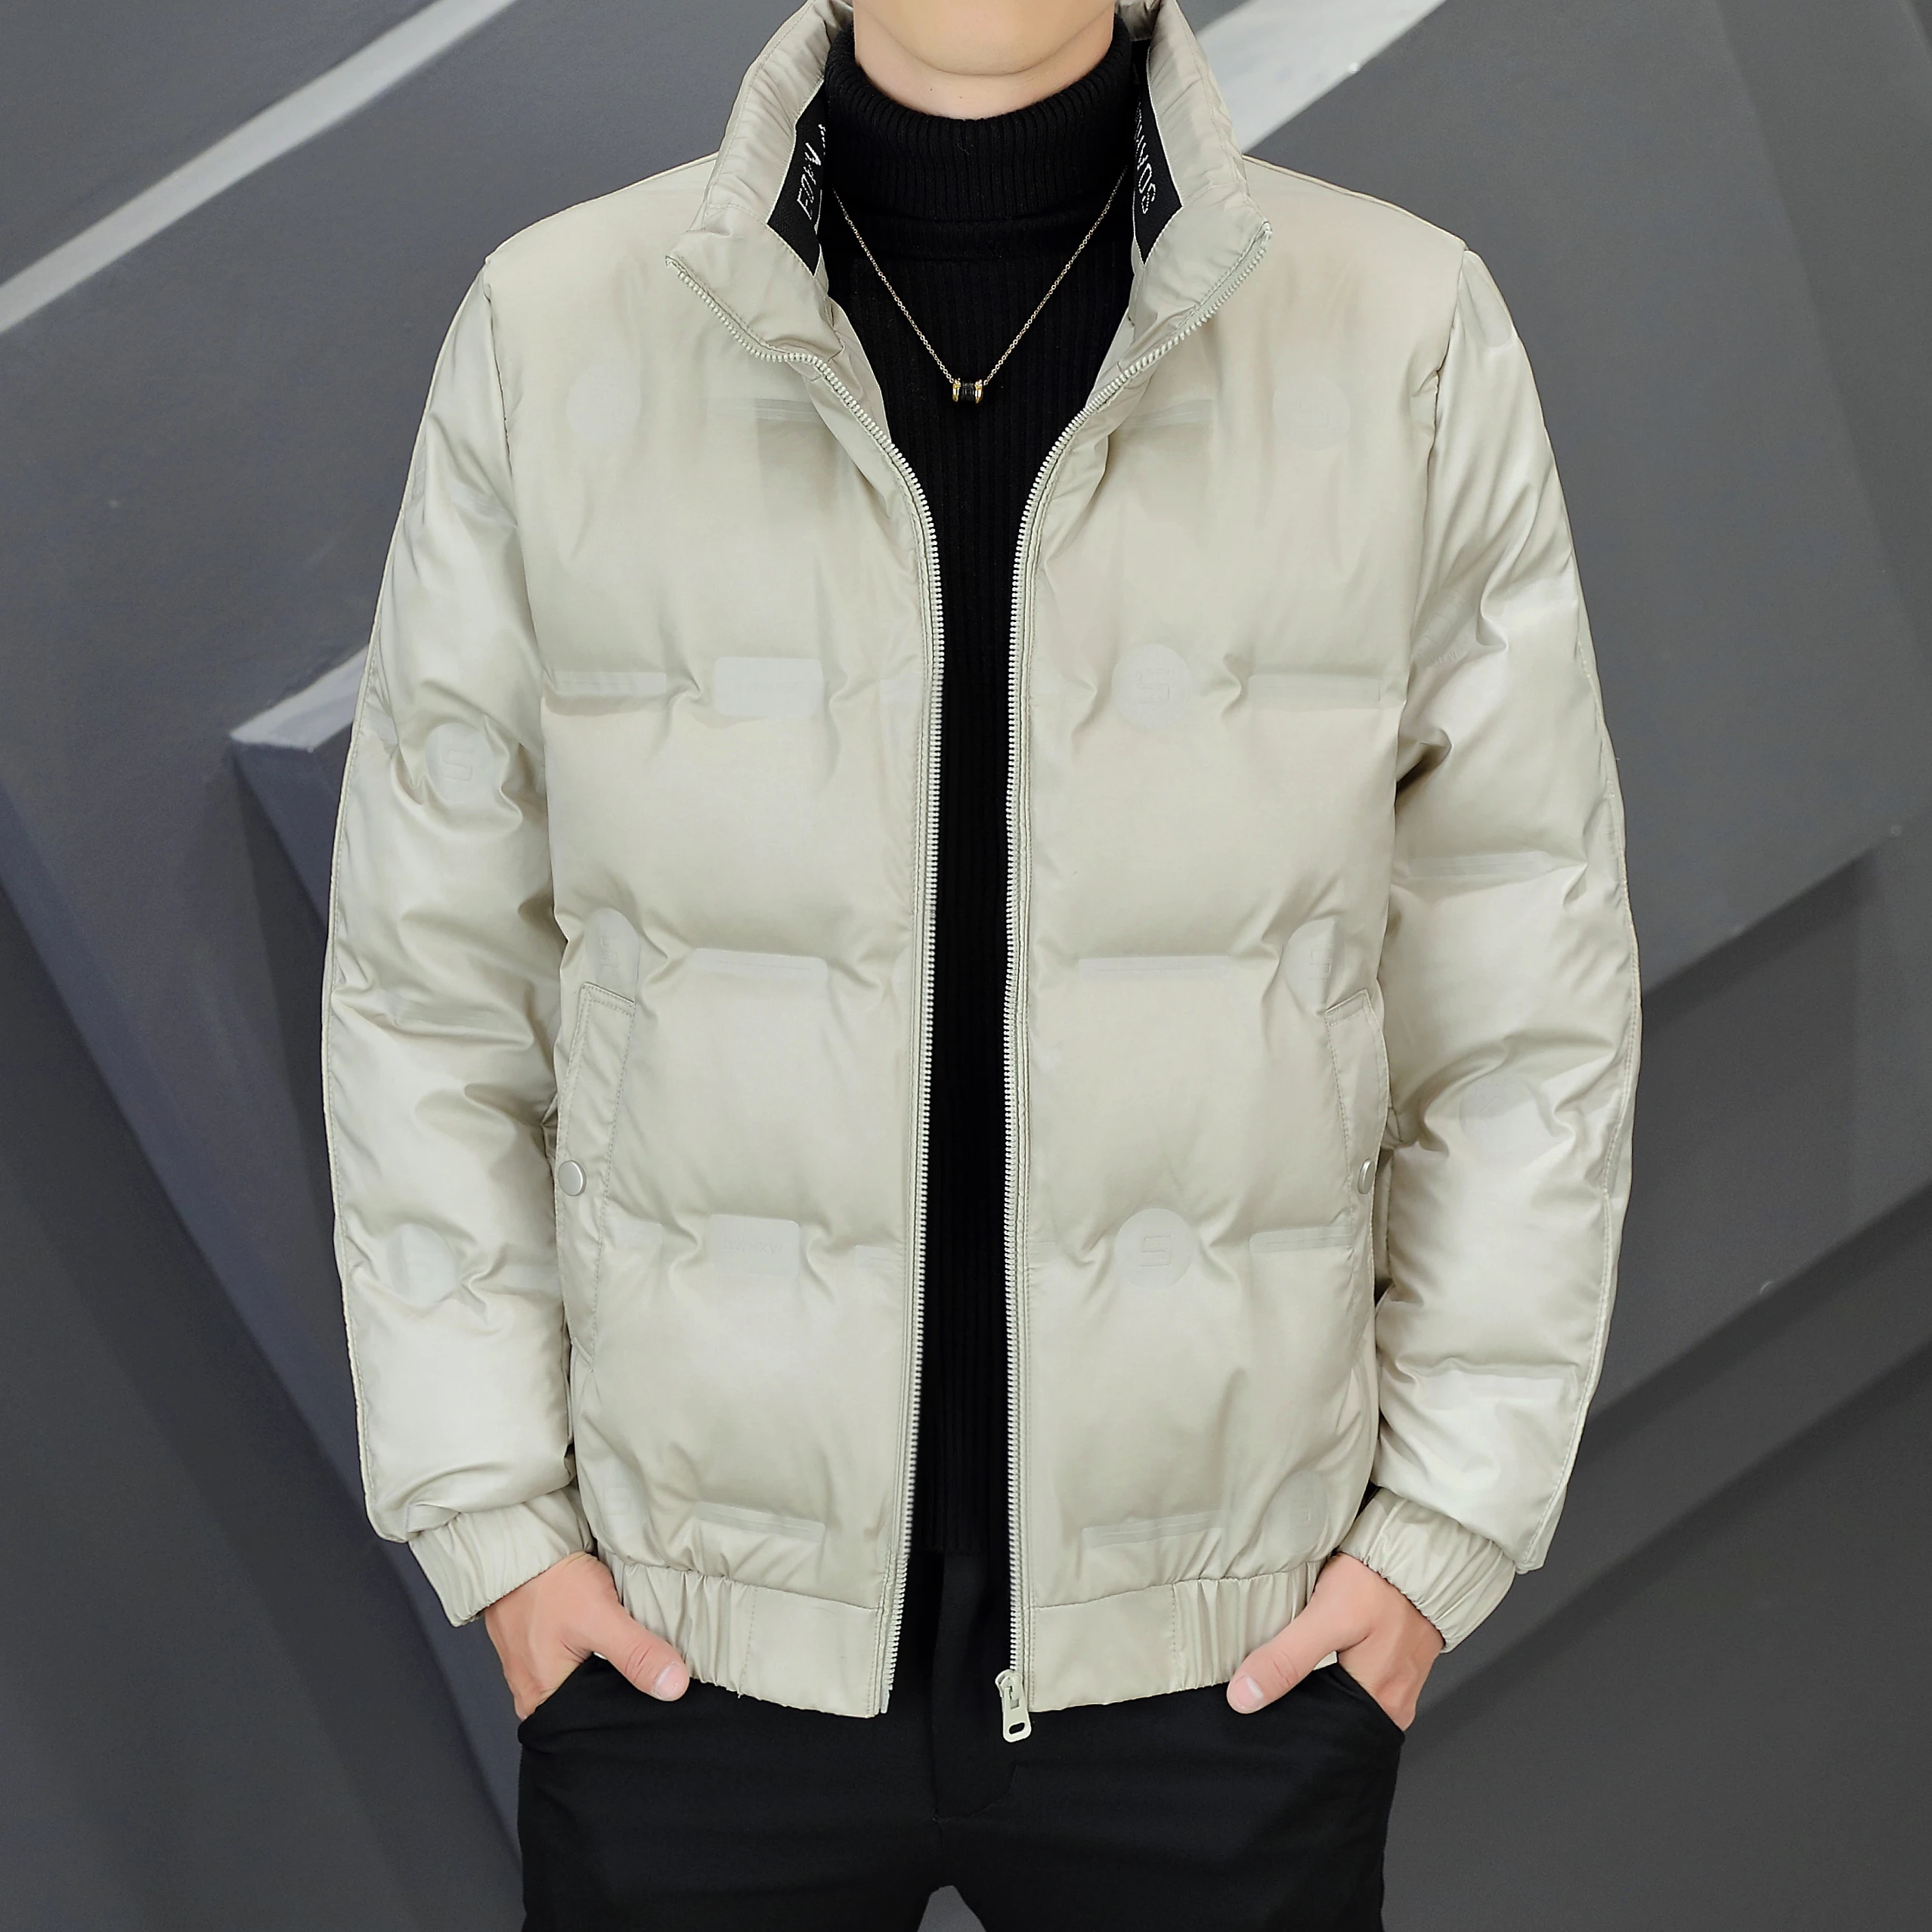 Fashion Solid 2022 Autumn Winter Casual White Duck Down Jacket Mens Outwear Puffer Coats Male Stand Collar Parkas Tops Clothing